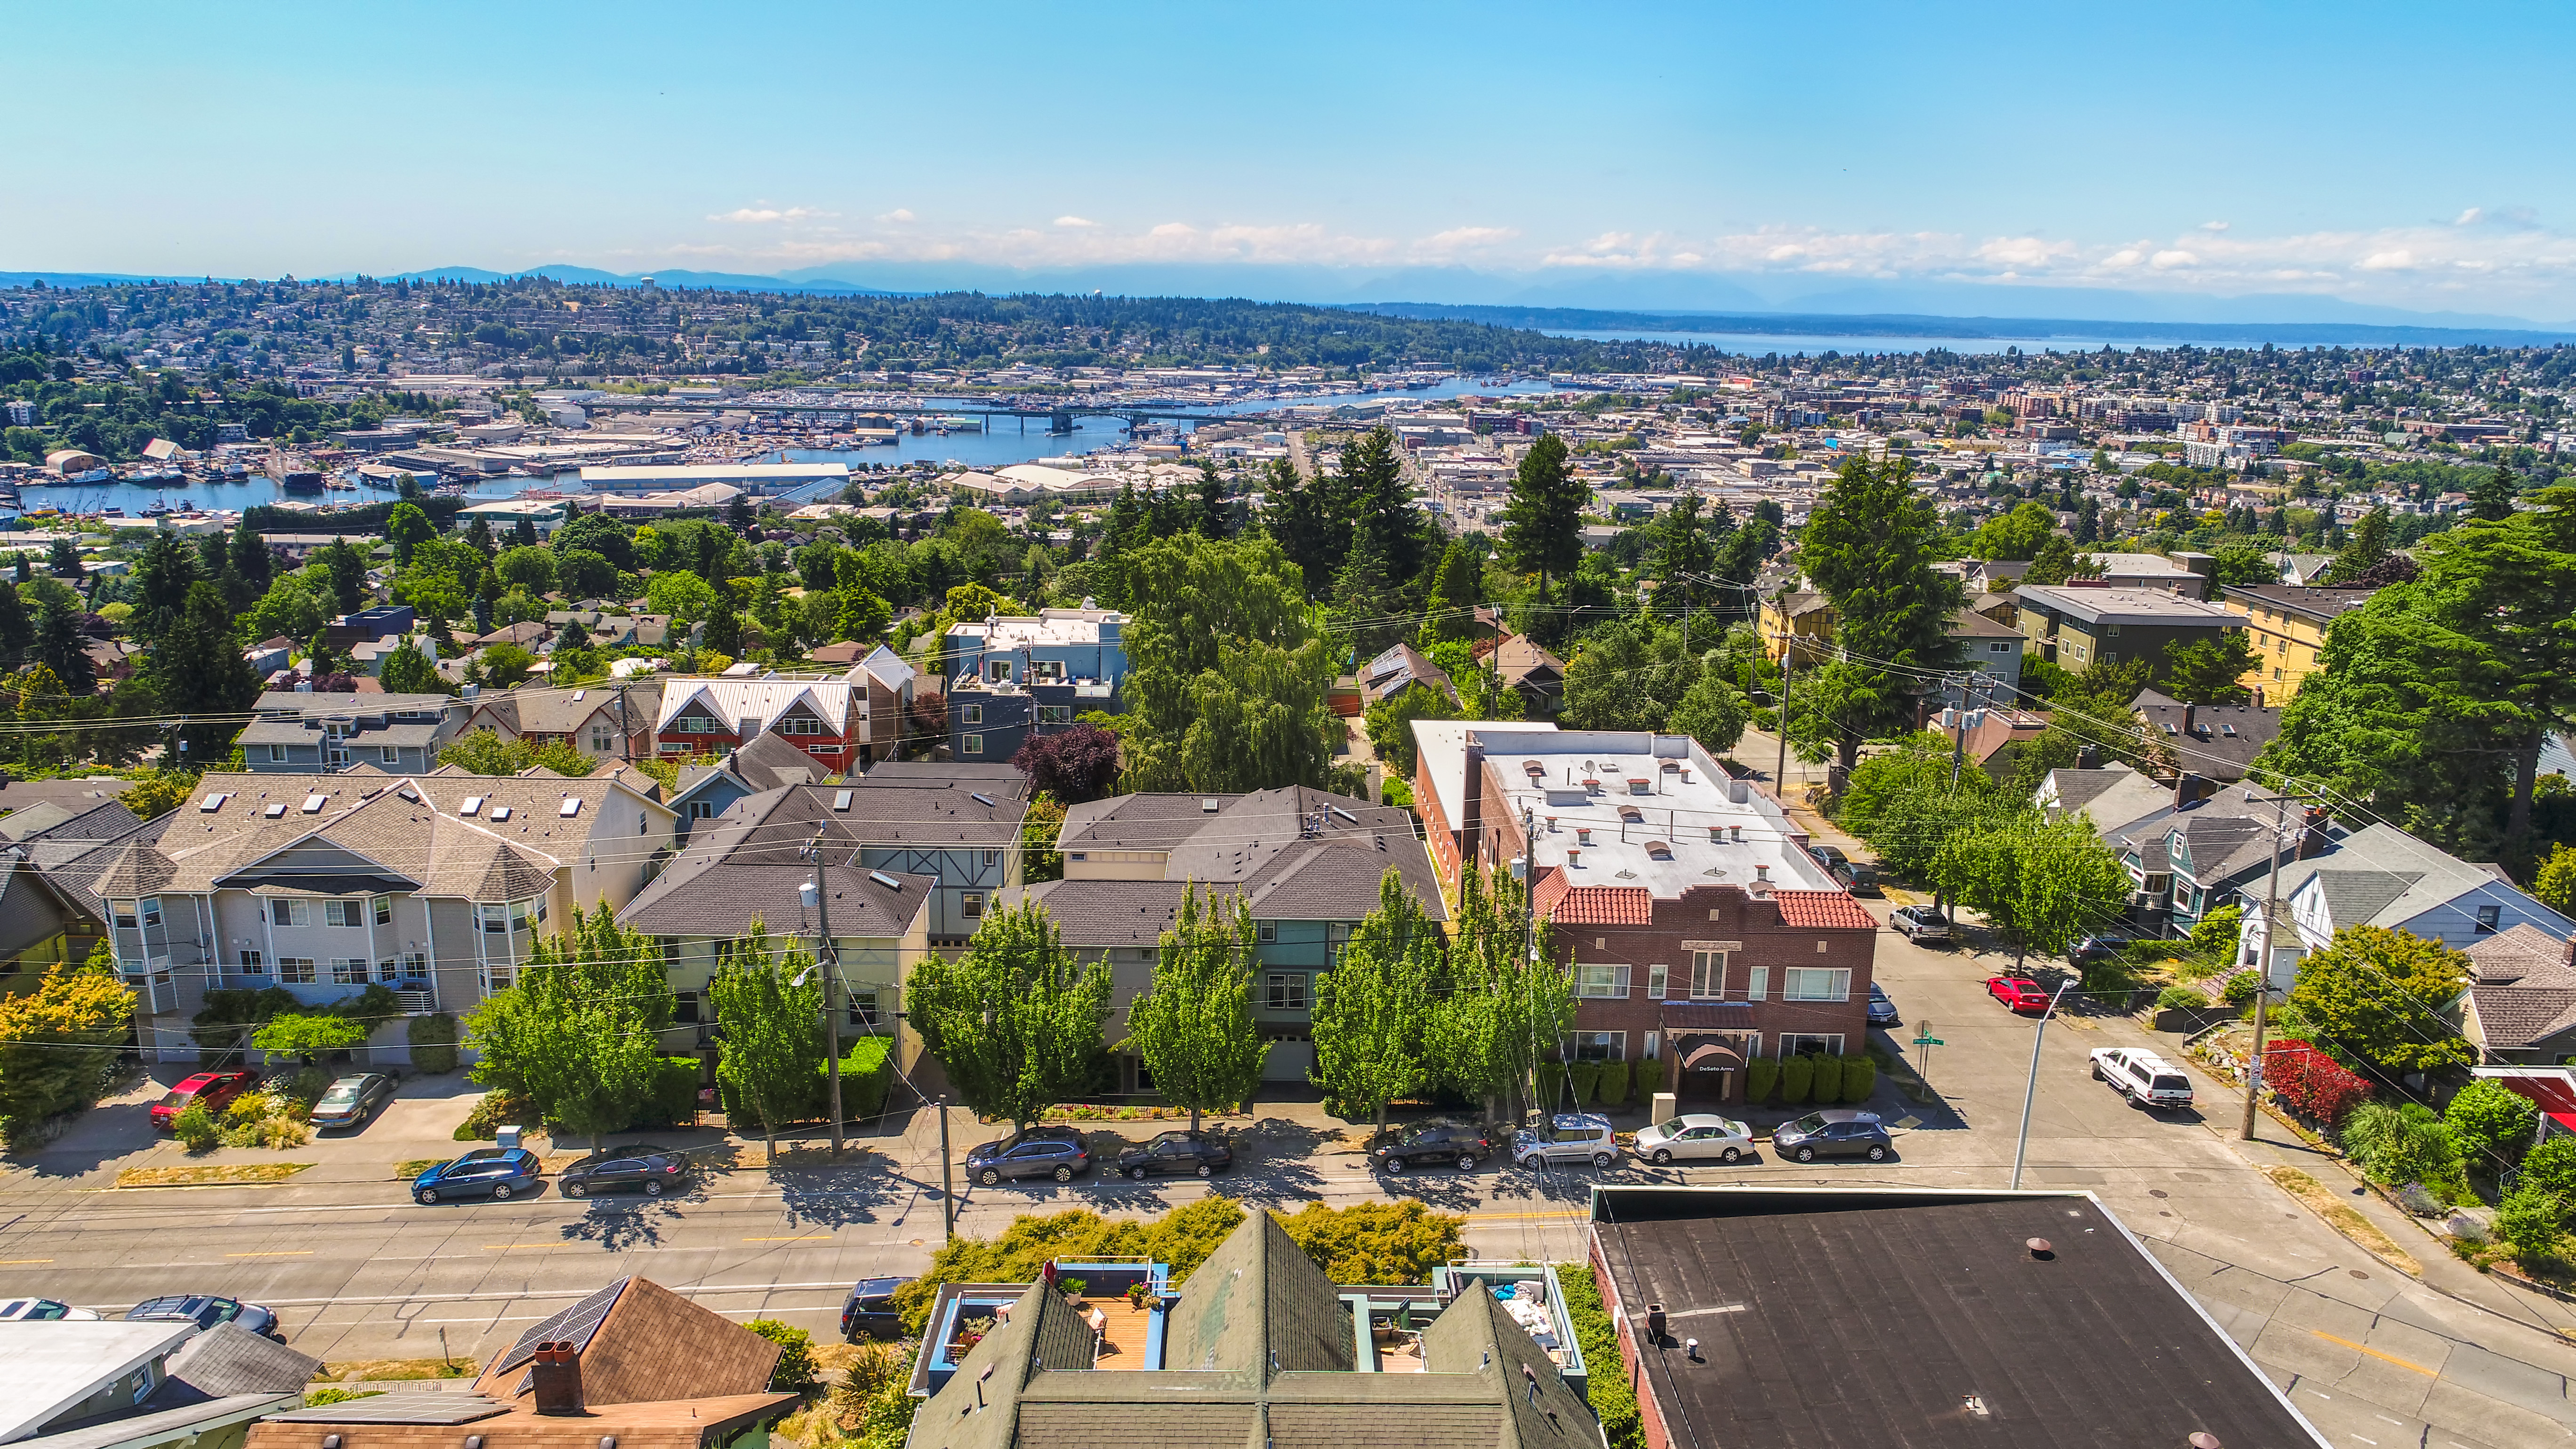 Property Photo: Aerials 4428 Phinney Ave N  WA 98103 